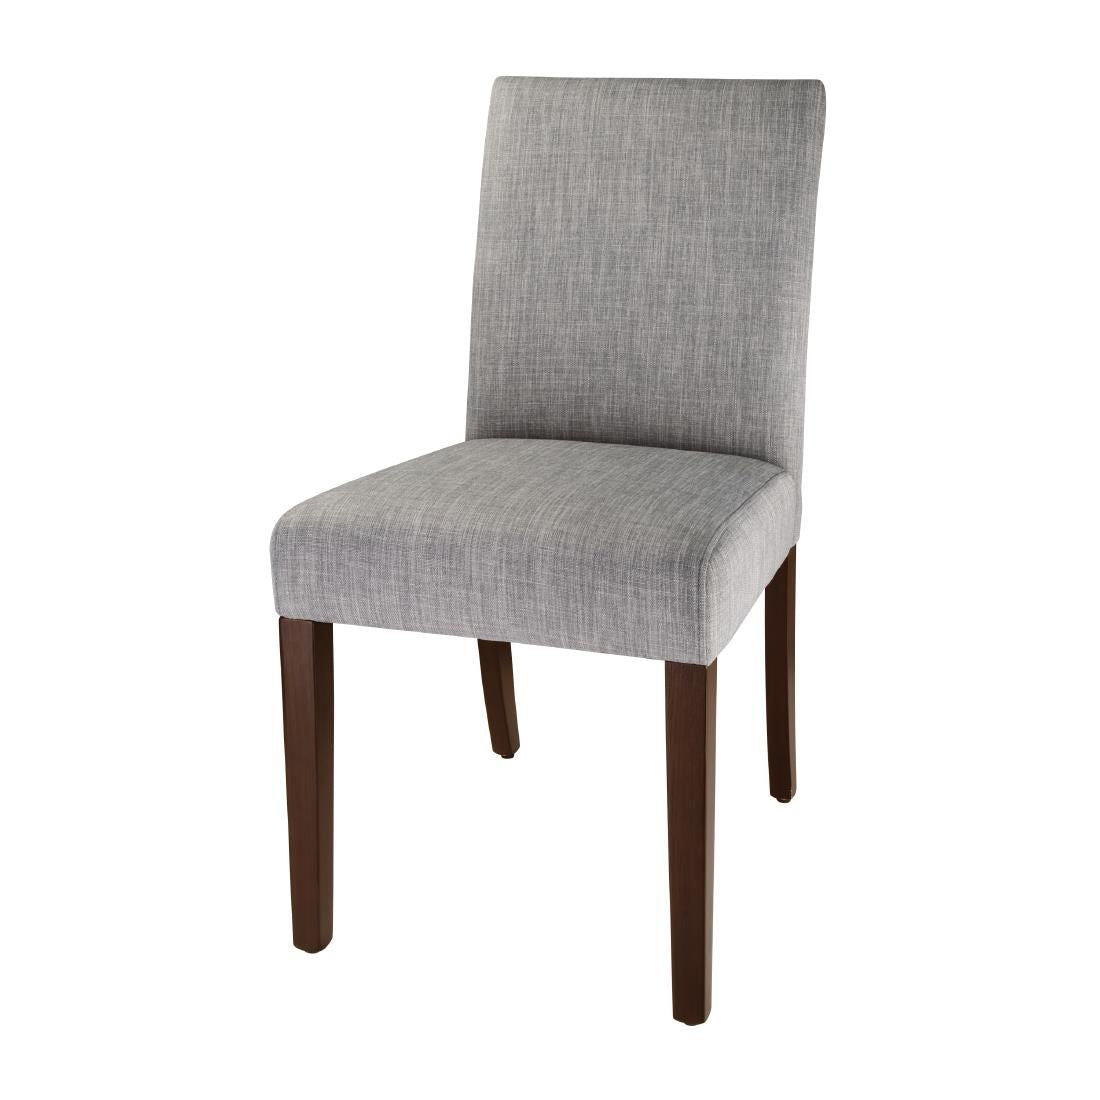 Bolero Chiswick Dining Chairs (Pack of 2) JD Catering Equipment Solutions Ltd